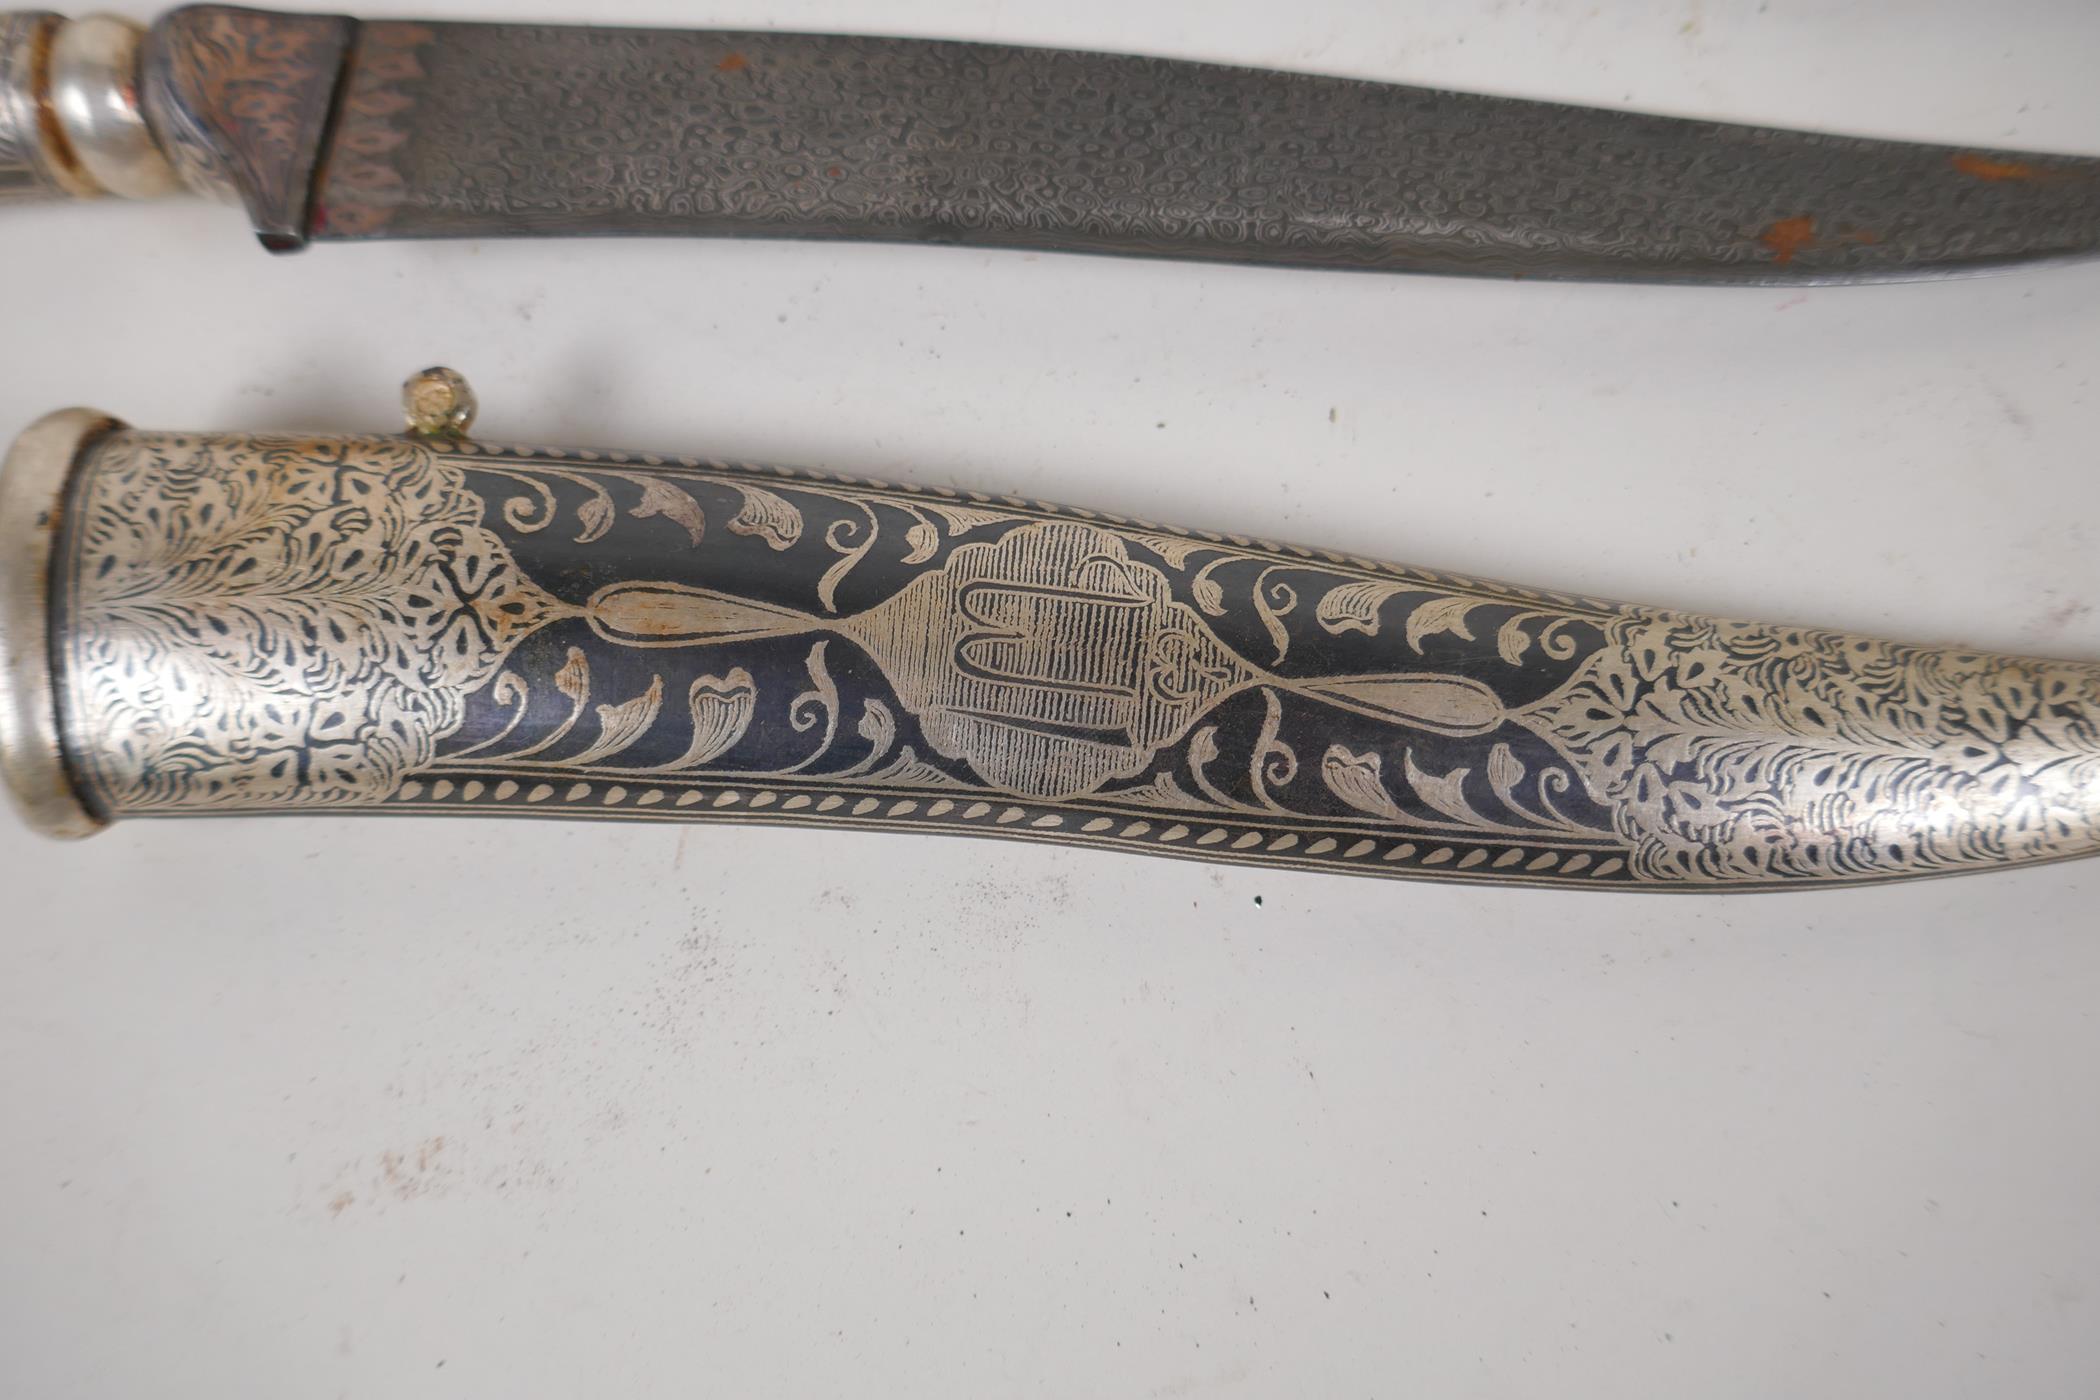 An Eastern dagger with rams mask handle and niello decorated scabbard, 15" long, and a horn - Image 4 of 5